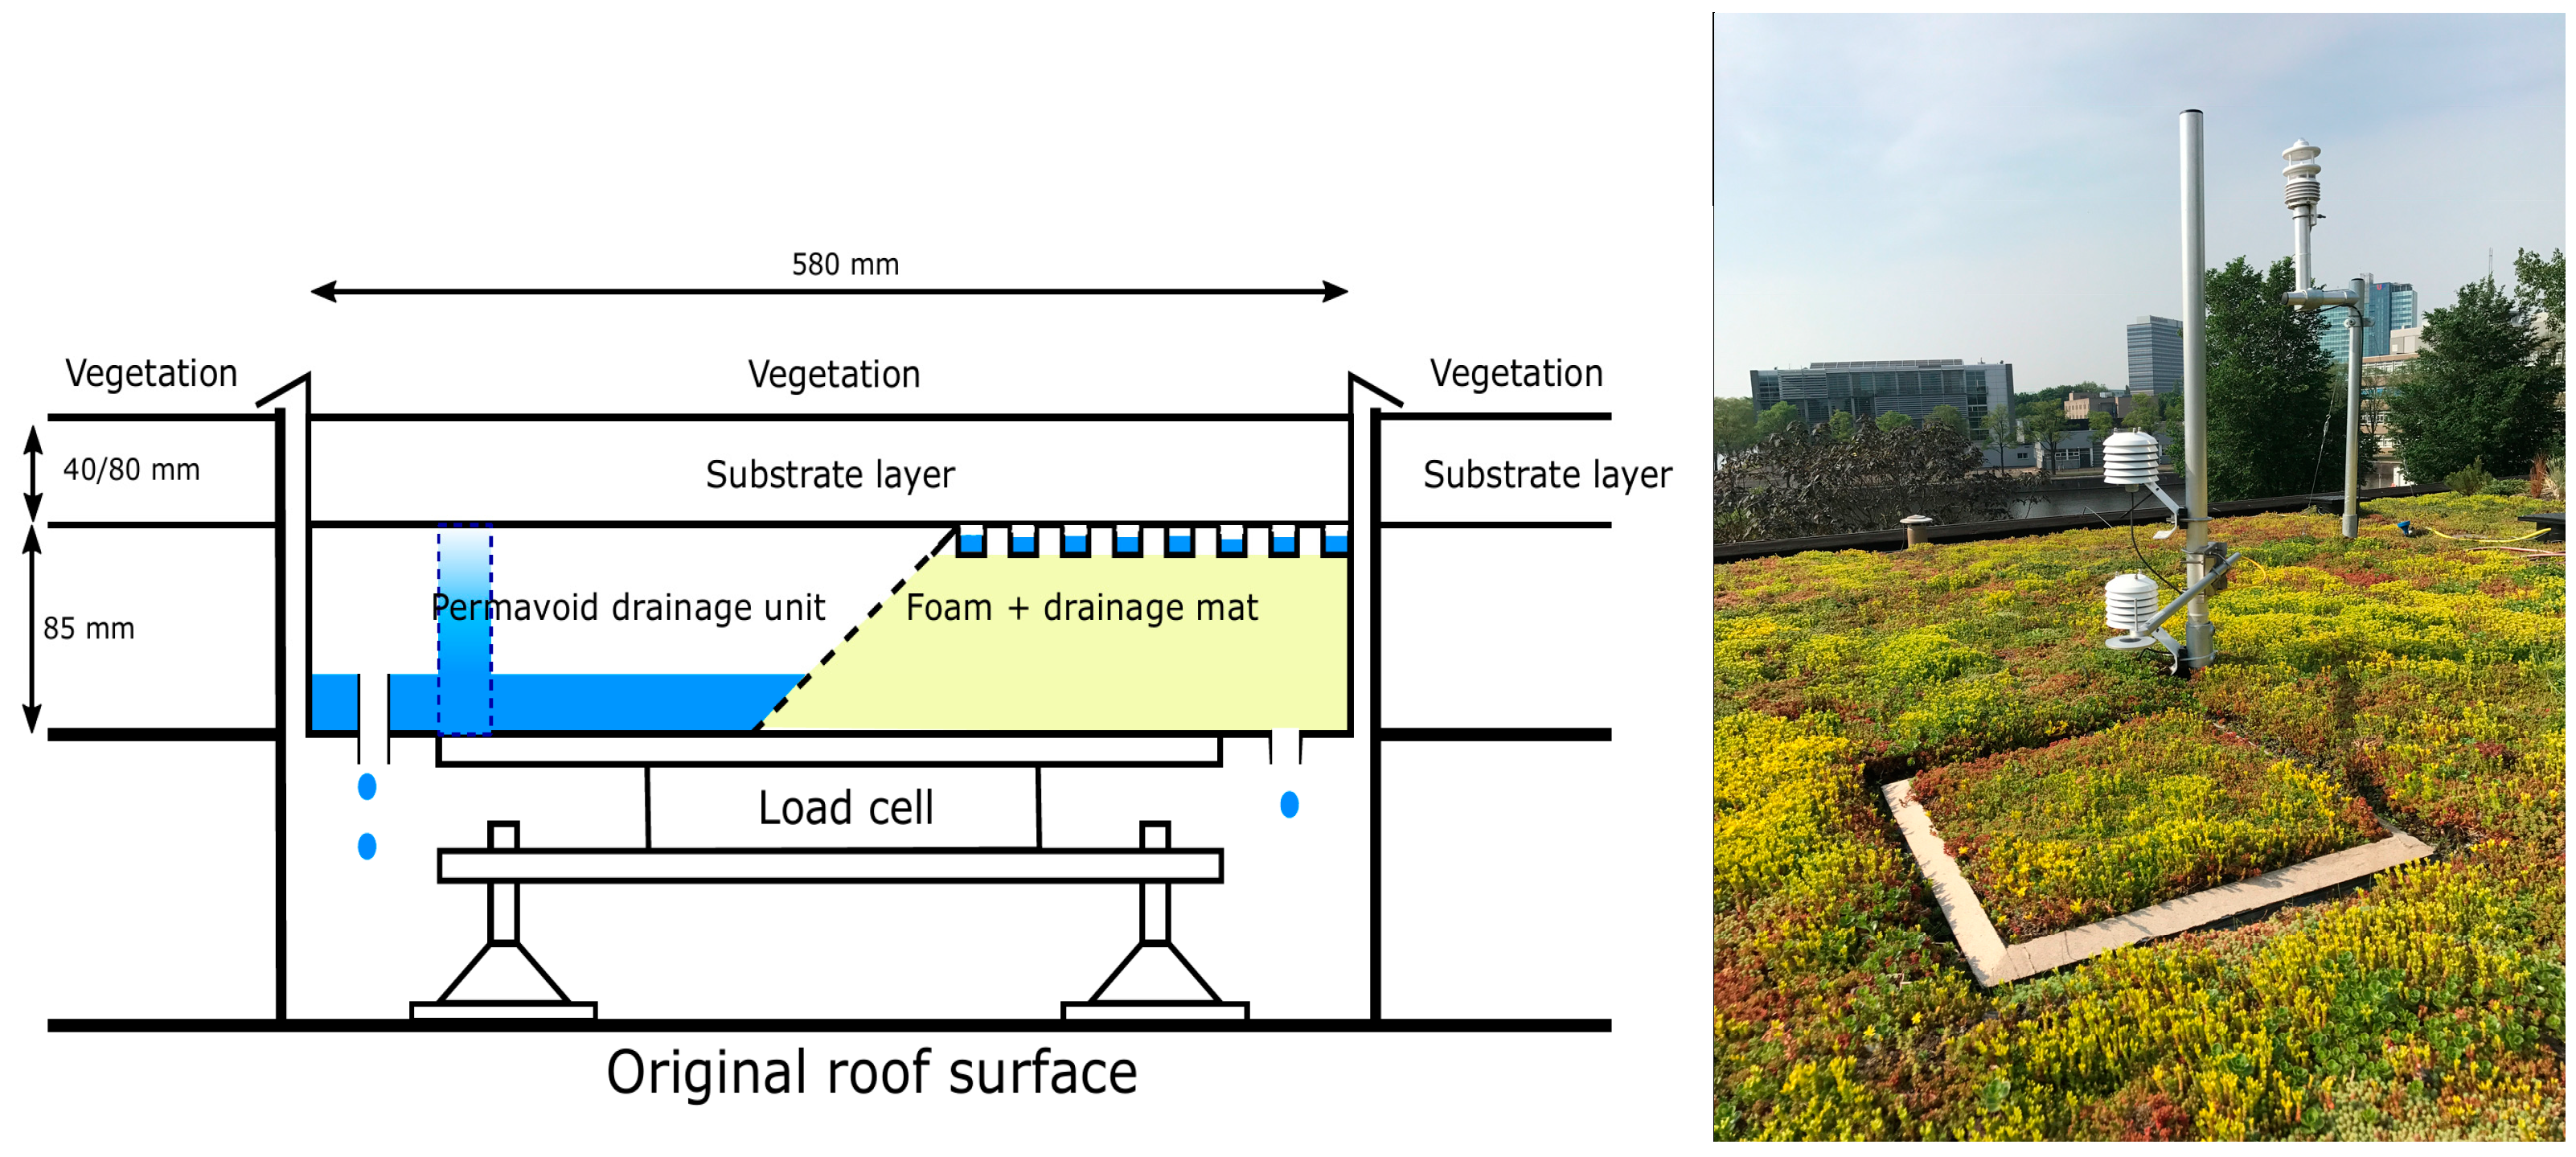 Water Free Full Text Evaporation From Blue Green Roofs Assessing The Benefits Of A Storage And Capillary Irrigation System Based On Measurements And Modeling Html